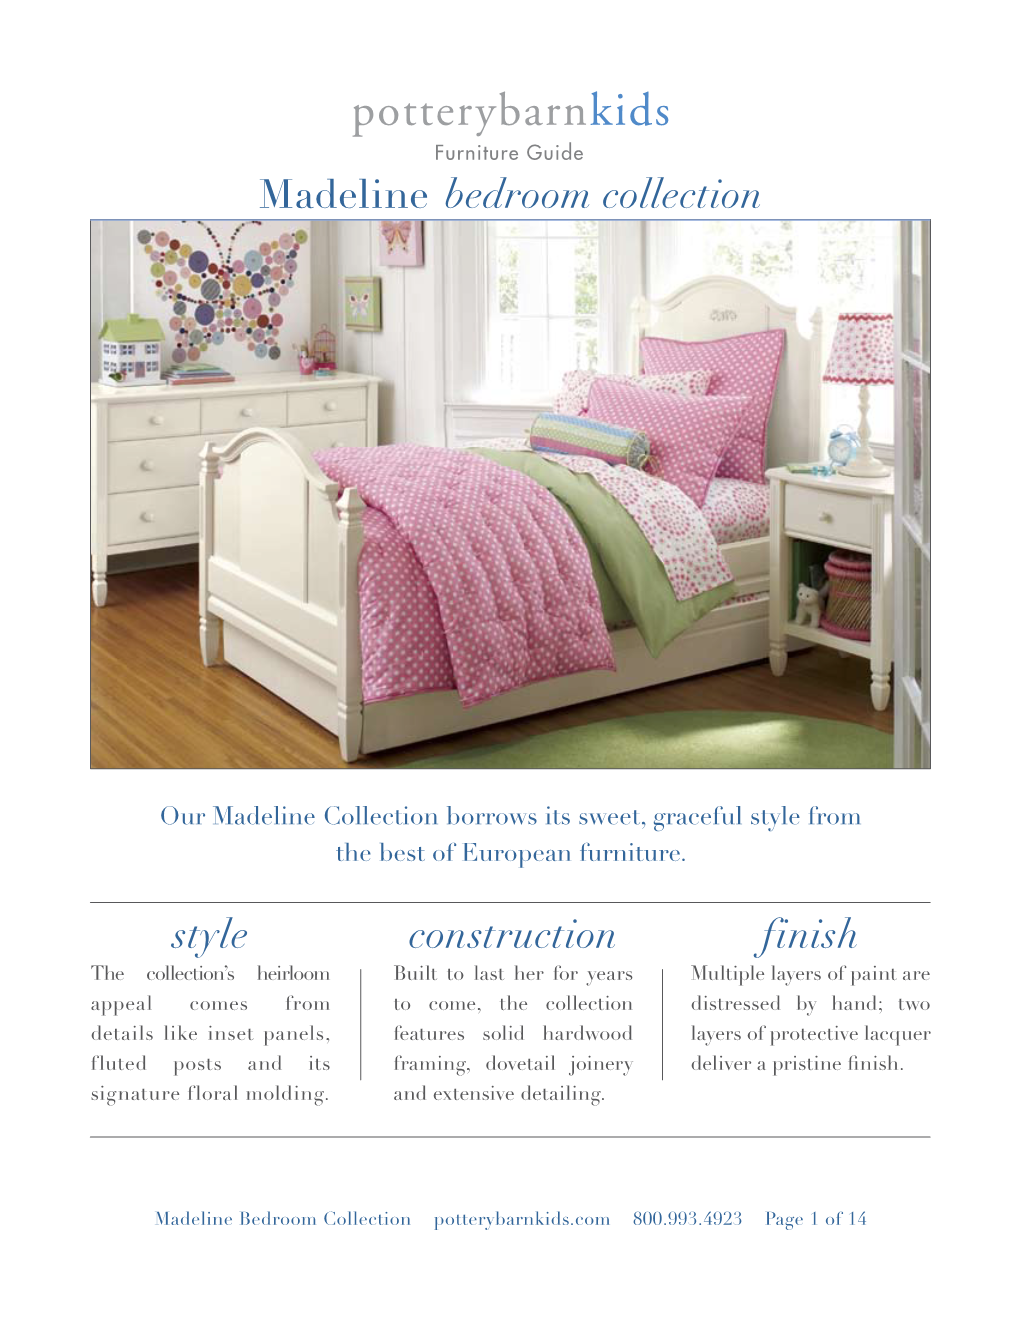 Potterybarnkids Furniture Guide Madeline Bedroom Collection